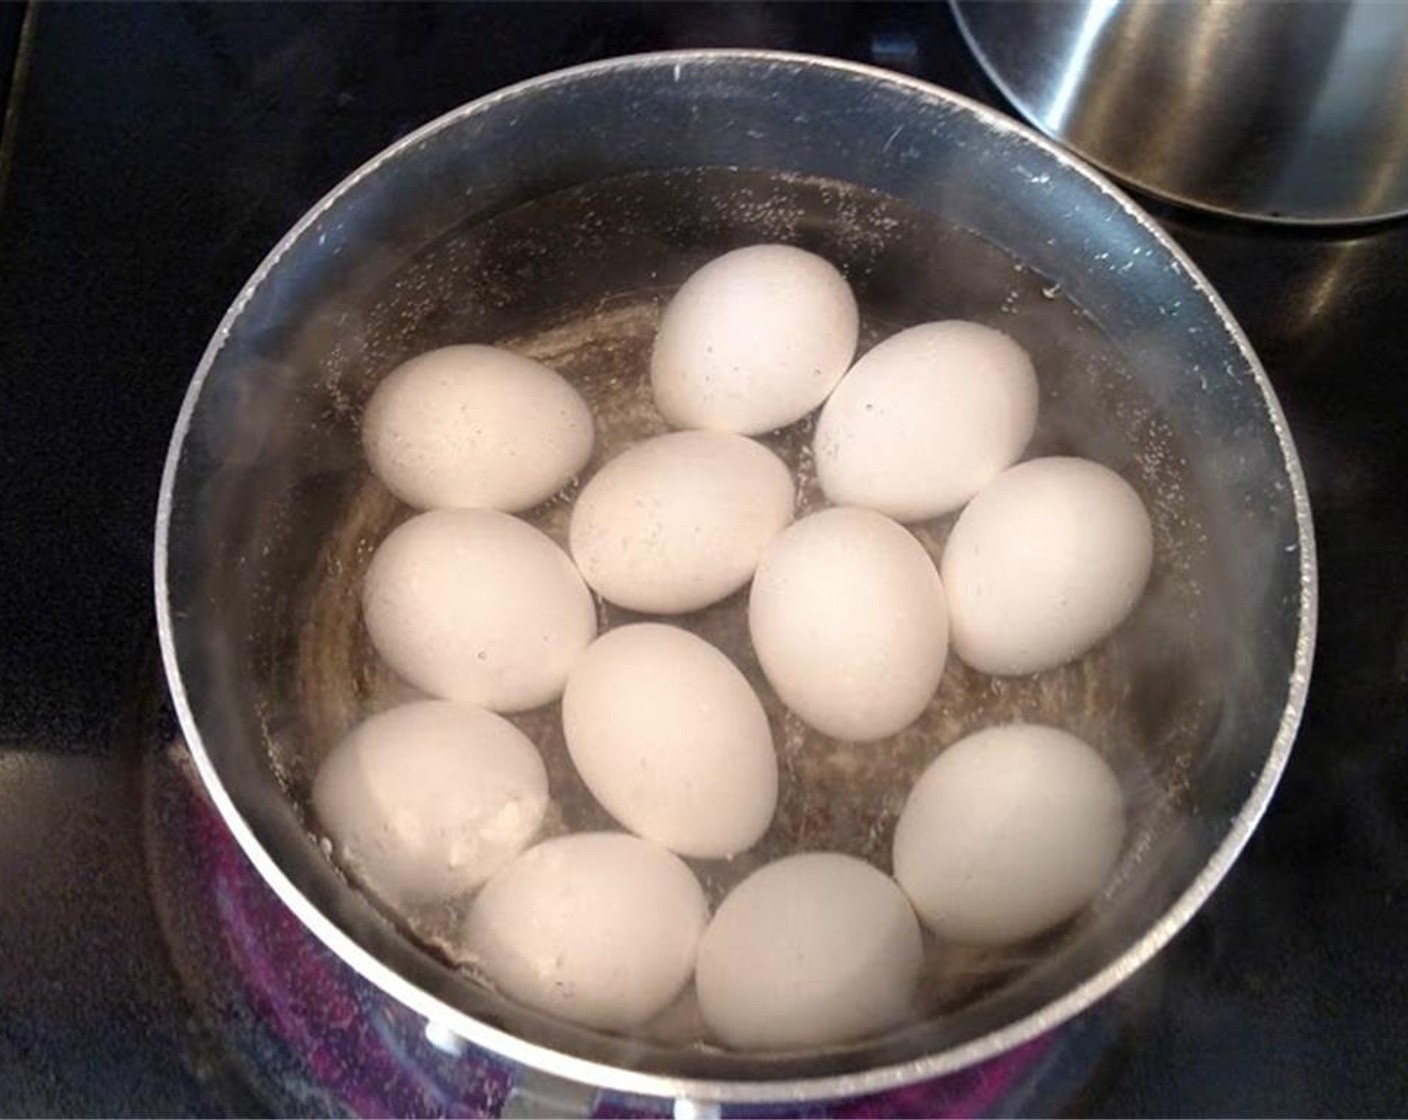 step 2 Turn off heat and add warm water, cool water, then cold water to the pot. Allow whole eggs to rest in cold water for 5 minutes.